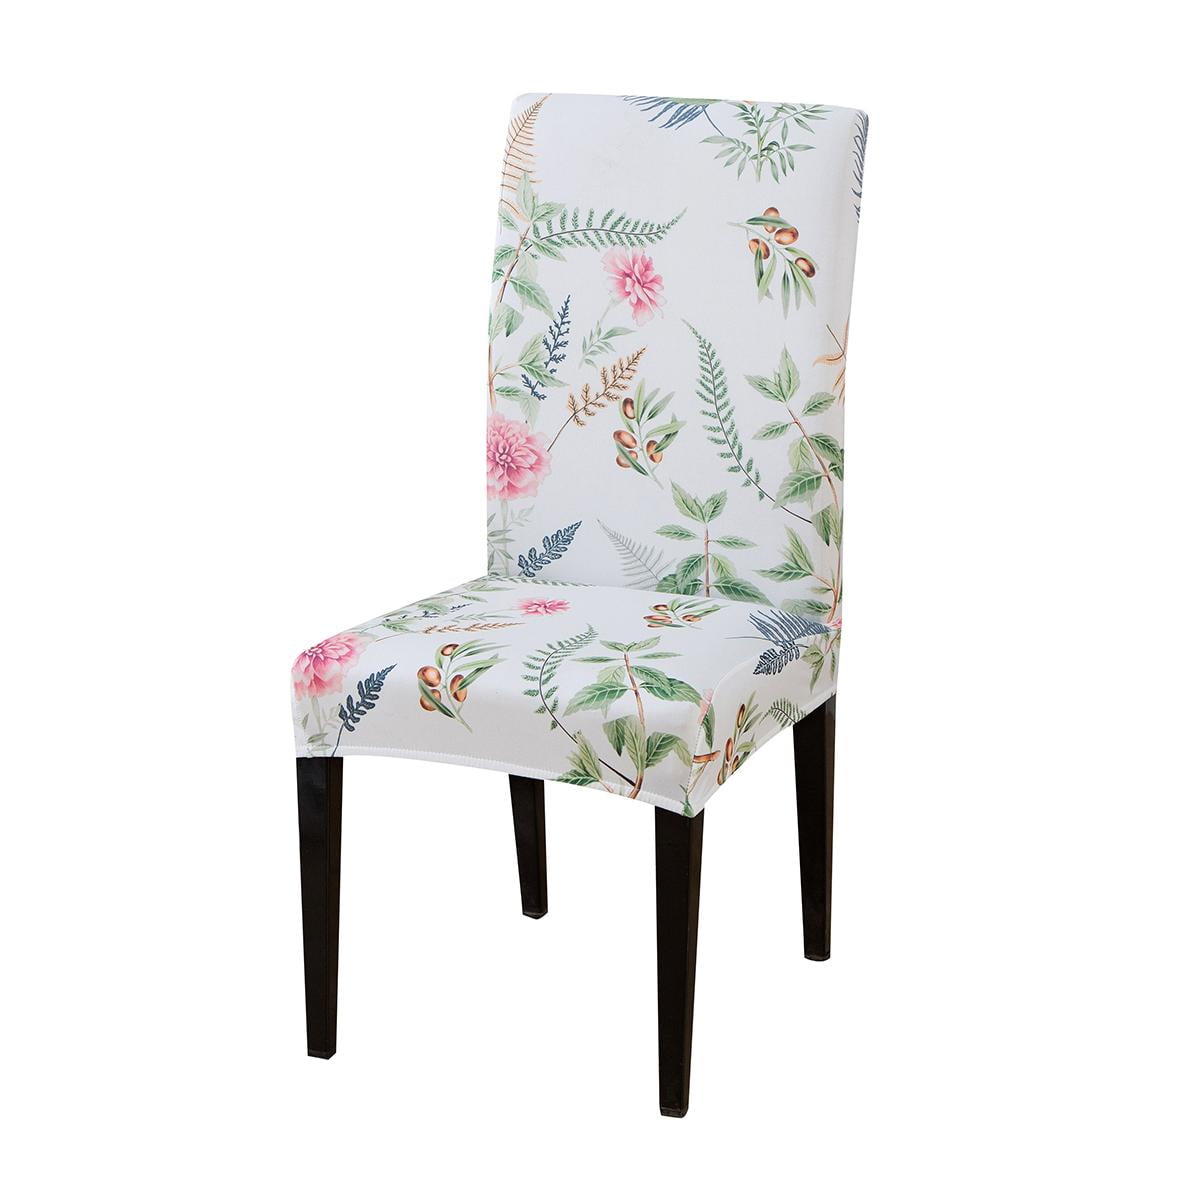 Floral Elastic Dining Room Wedding Banquet Chair Seat Cover Party Home Decor 